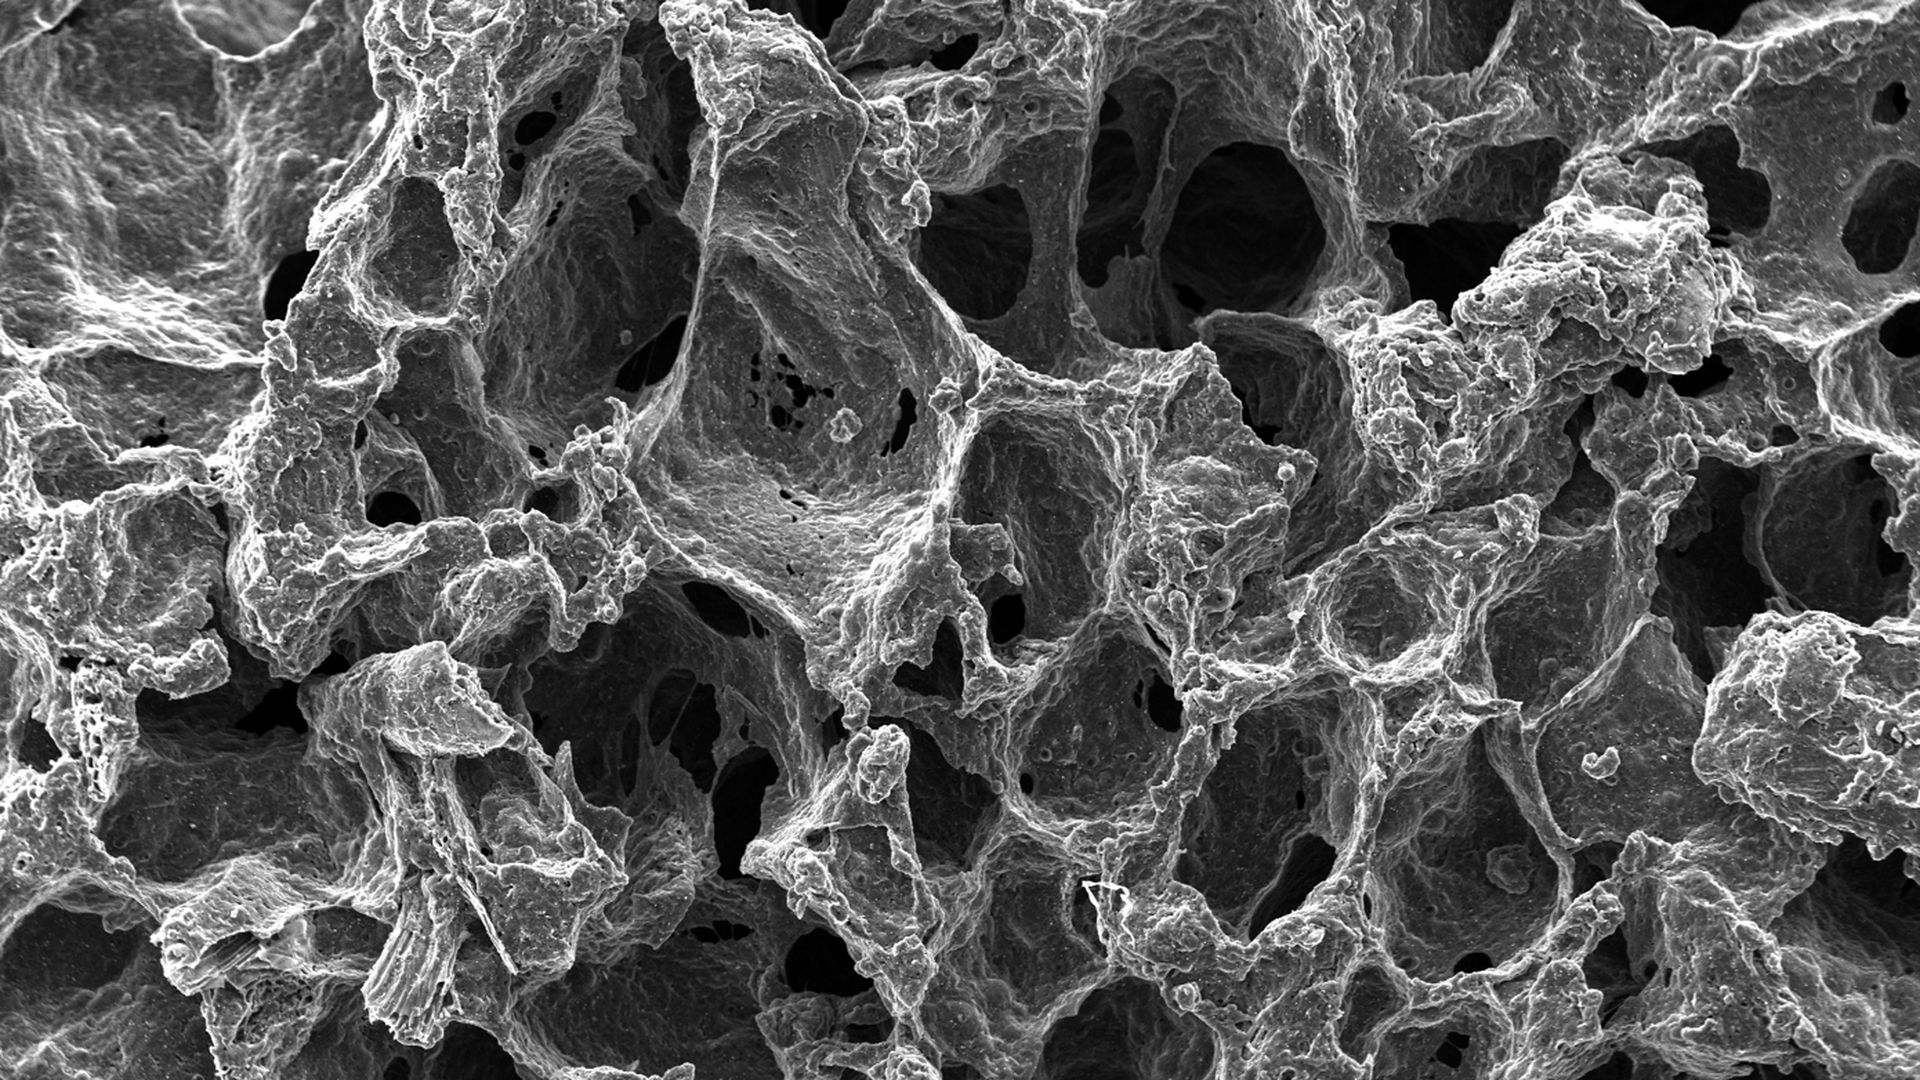 Scanning electron microscope (SEM) images of carbonized freestanding bread electrodes showing their highly porous structure.